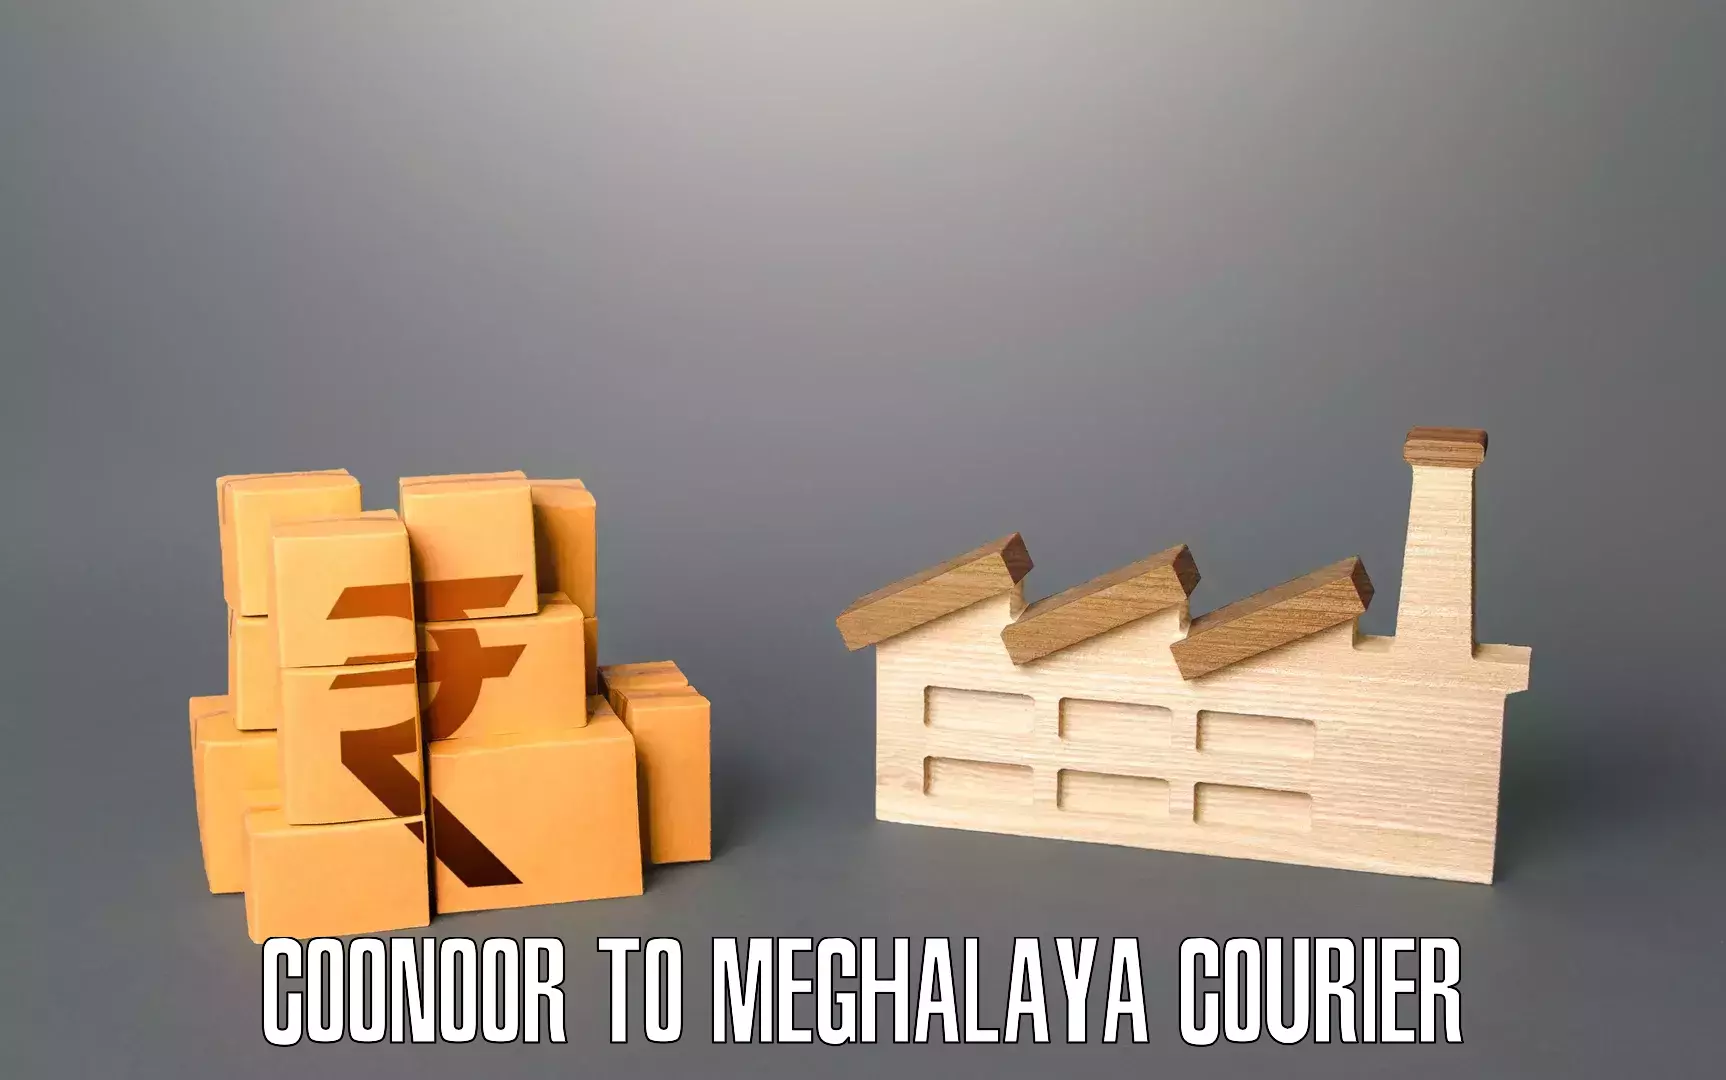 Home relocation experts Coonoor to Meghalaya